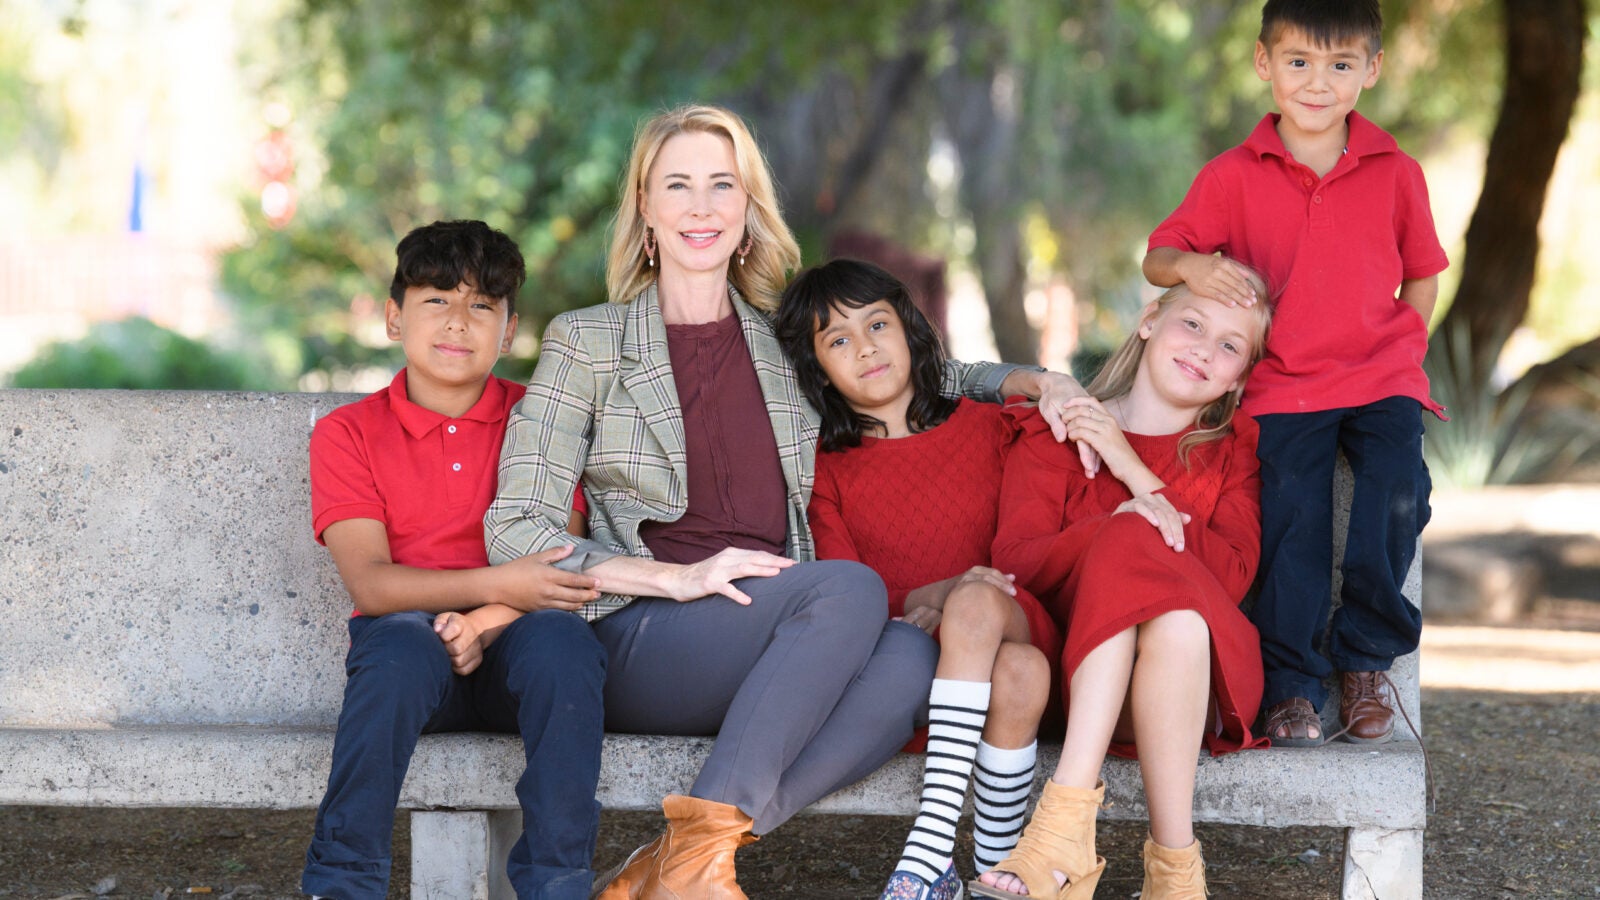 a woman sits on a bench with four children, all wearing red